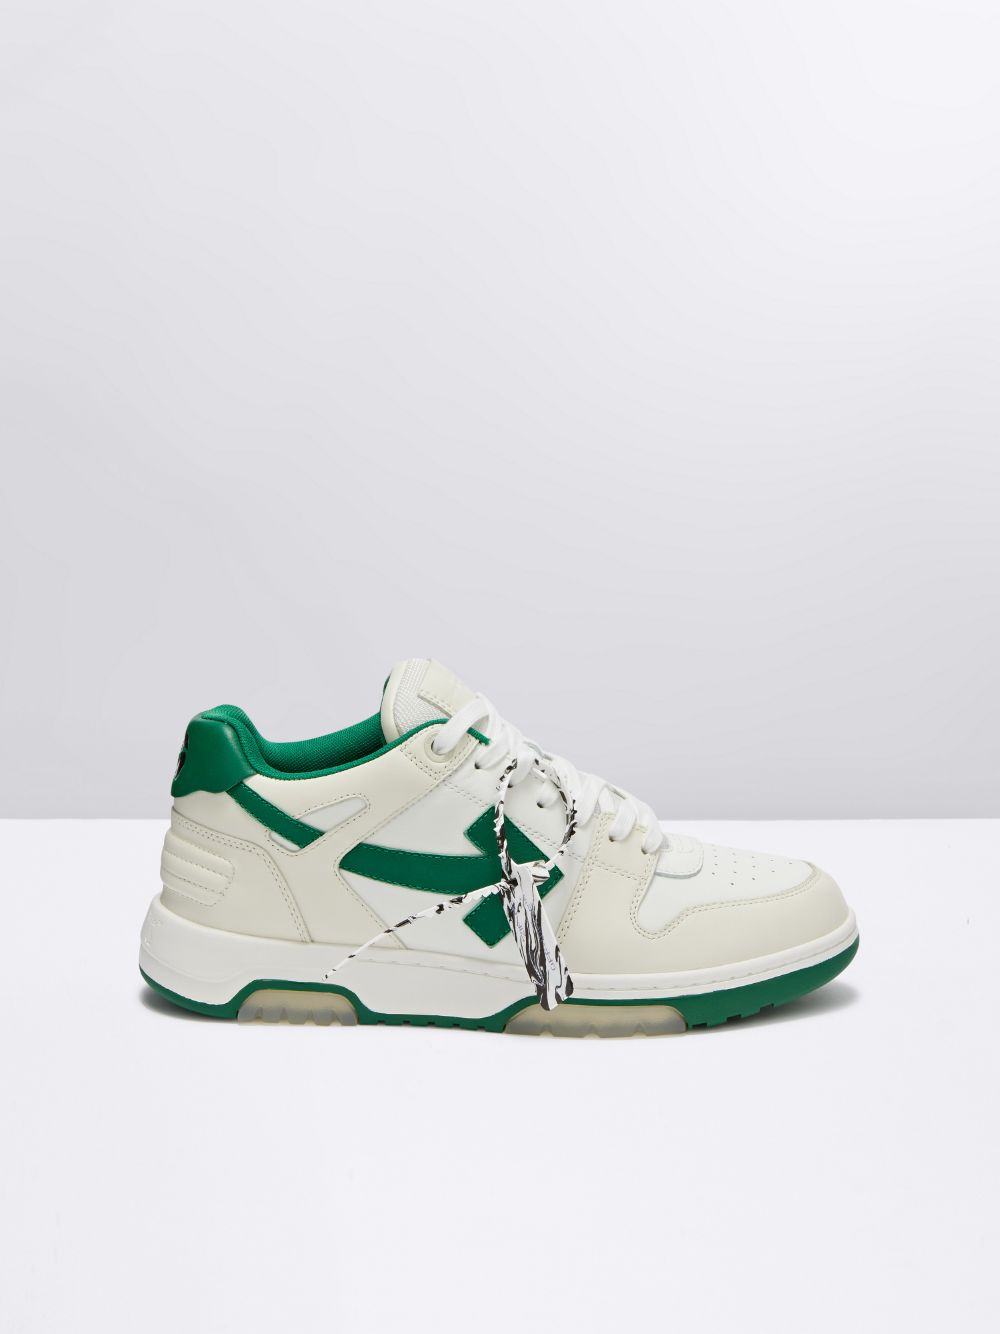 OUT OF OFFICE "OOO" SNEAKERS in white | Official RS